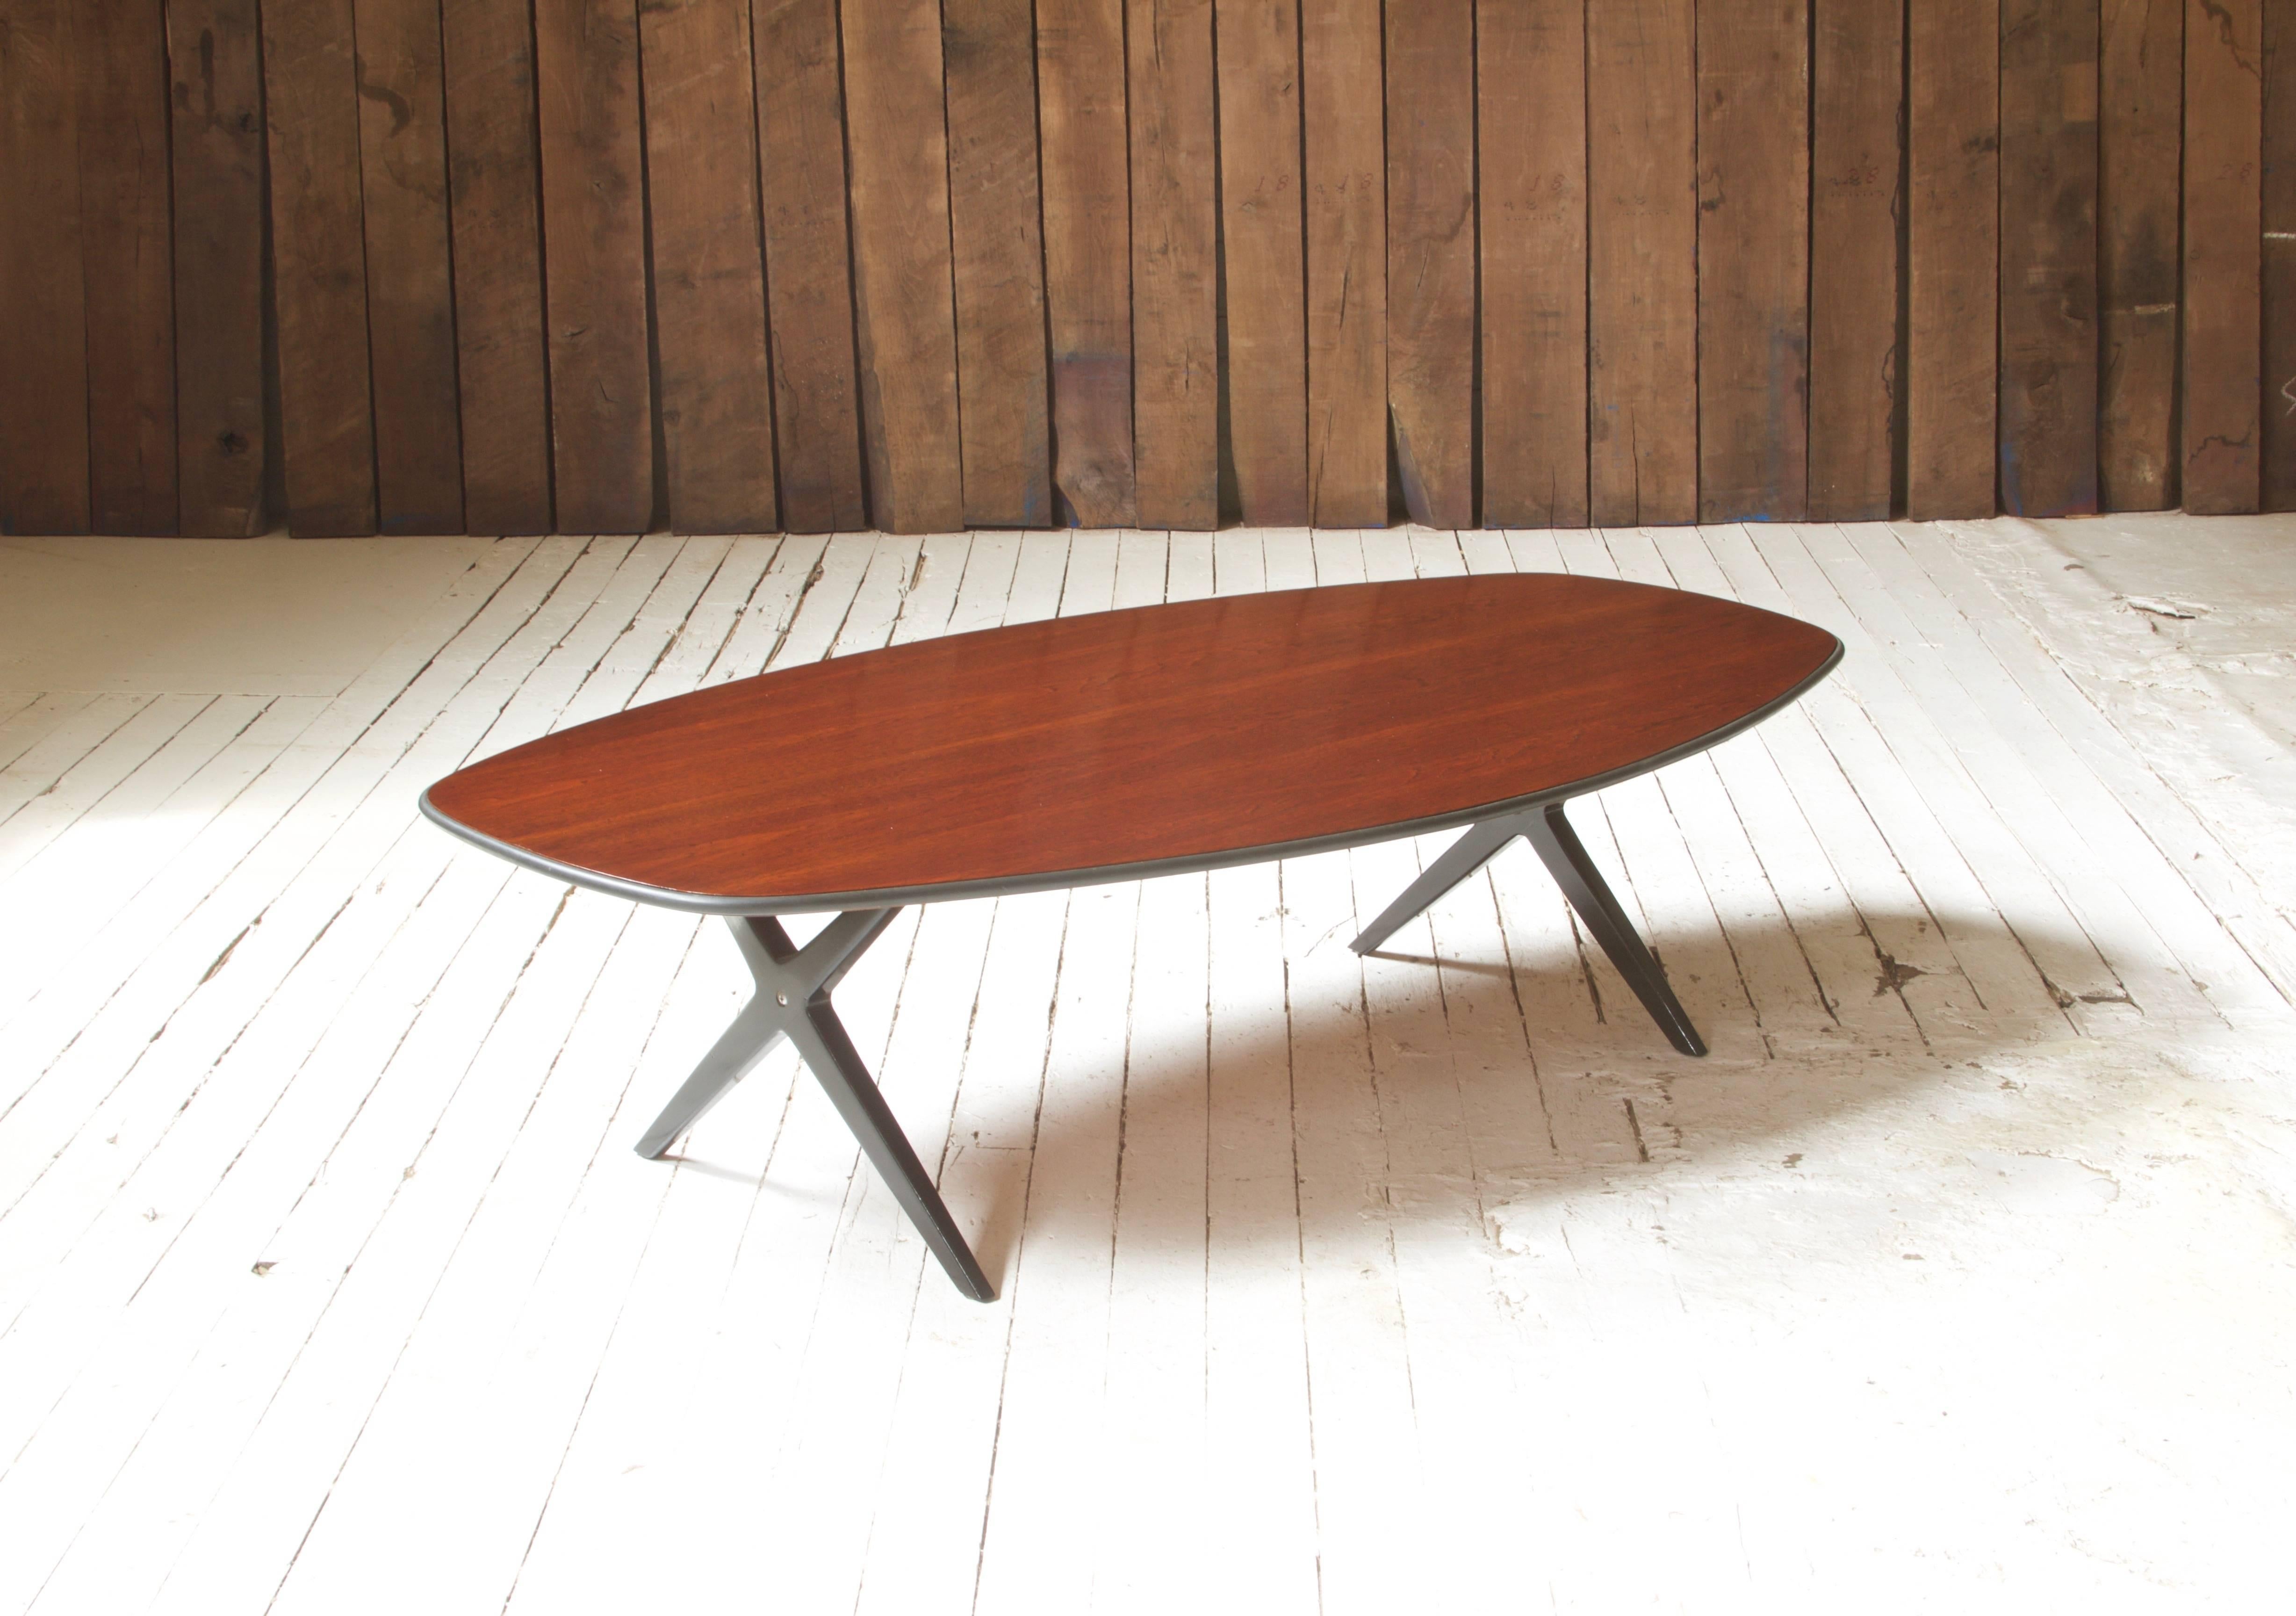 Attractive and practical coffee table of unusual form by George Nelson for Herman Miller featuring richly polished rosewood top with rubber bump-guard. 'Double-X' base of black lacquered wood with steel-tube supports; item is in very good vintage